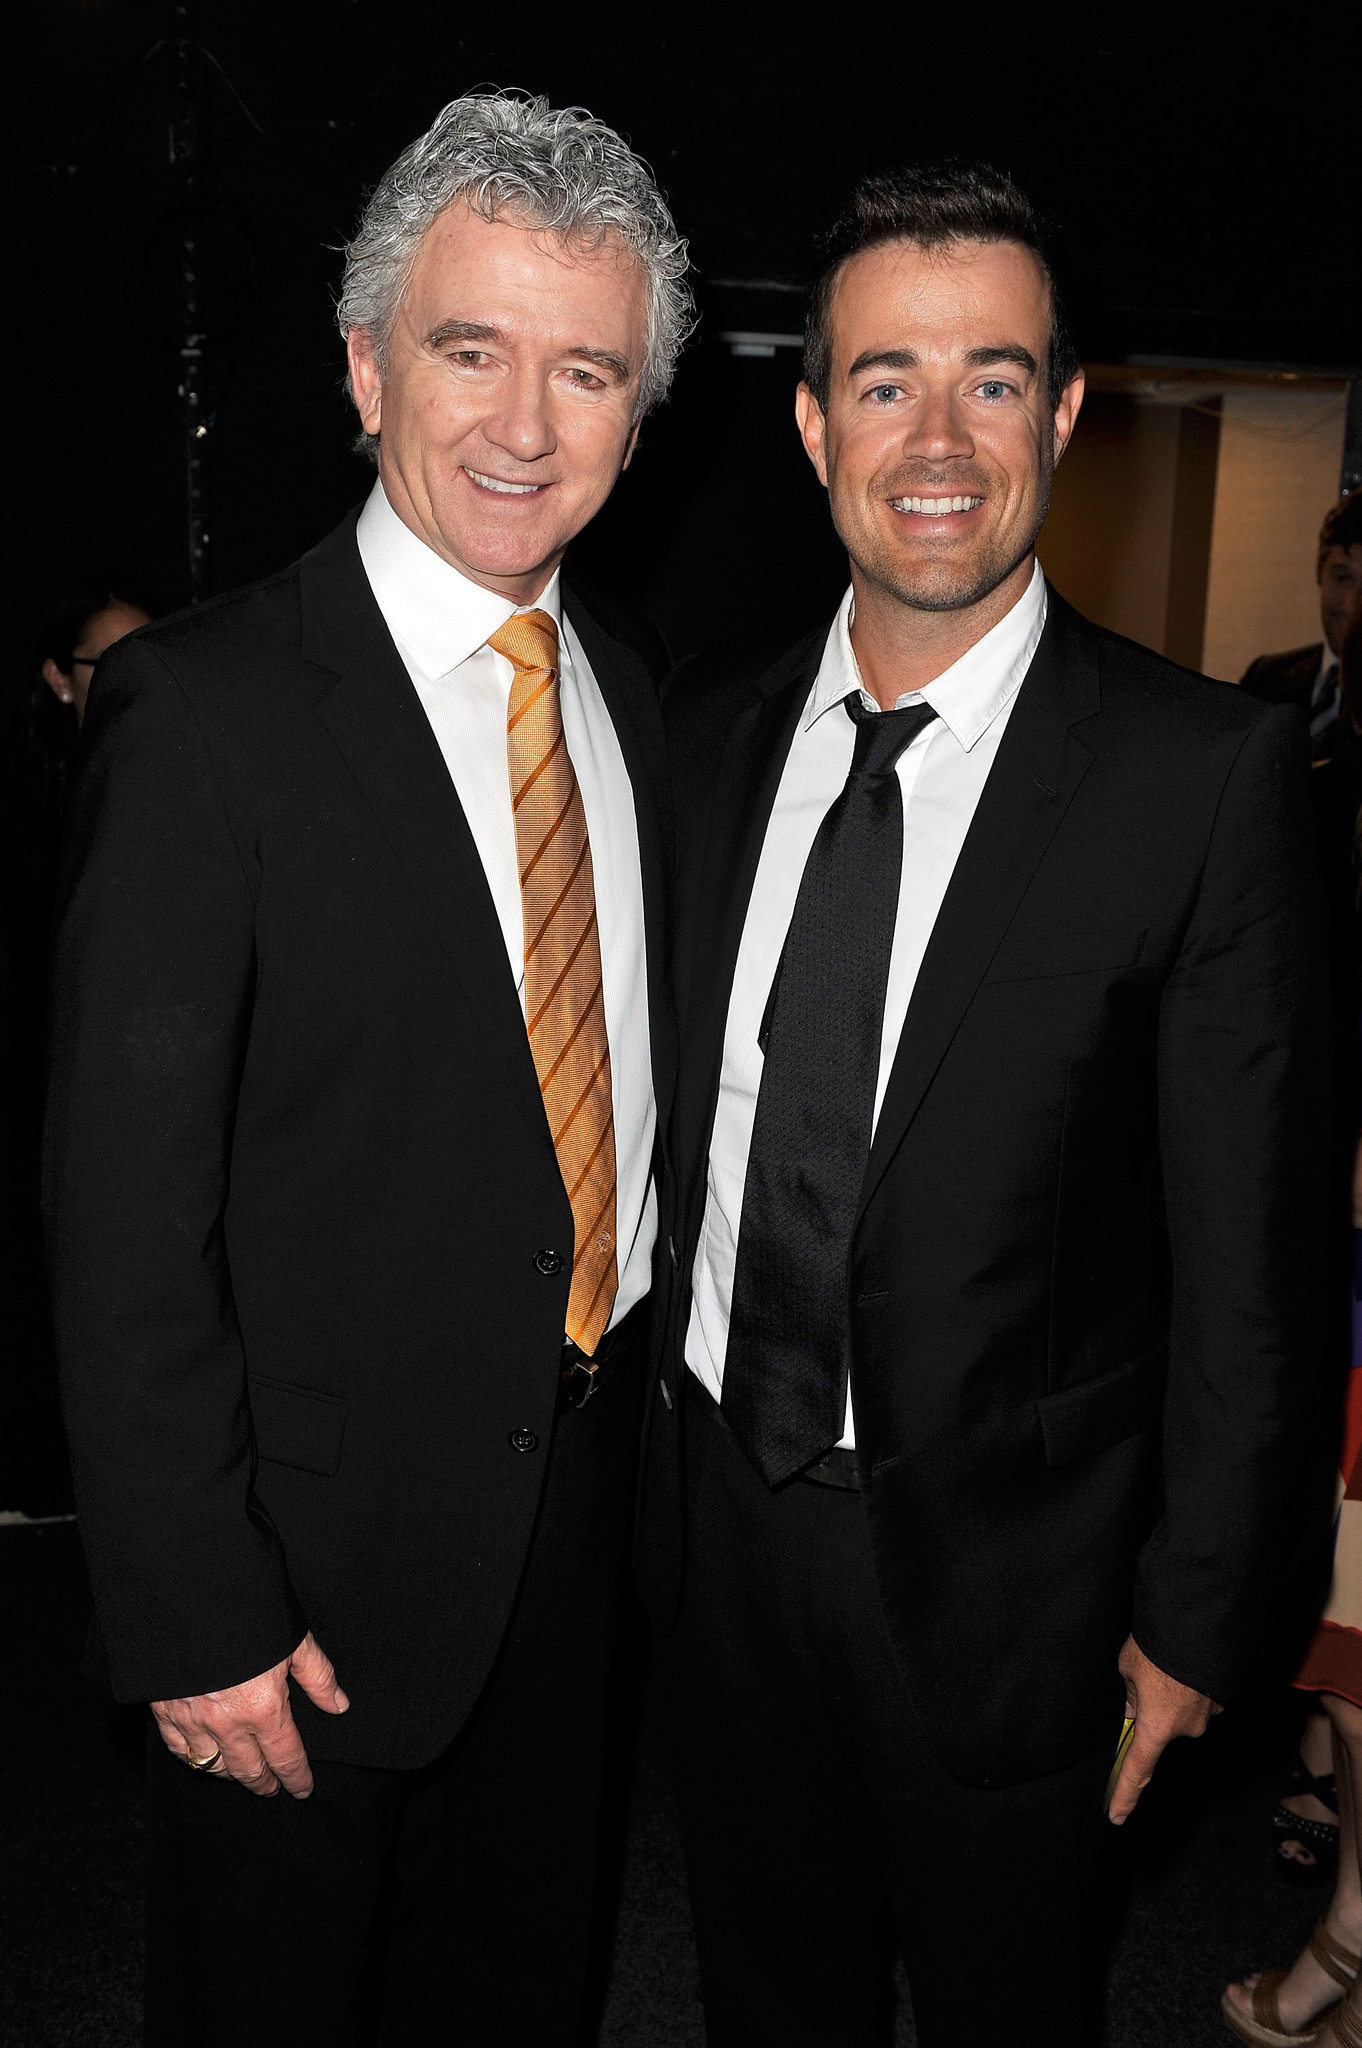 Patrick Duffy and Carson Daly